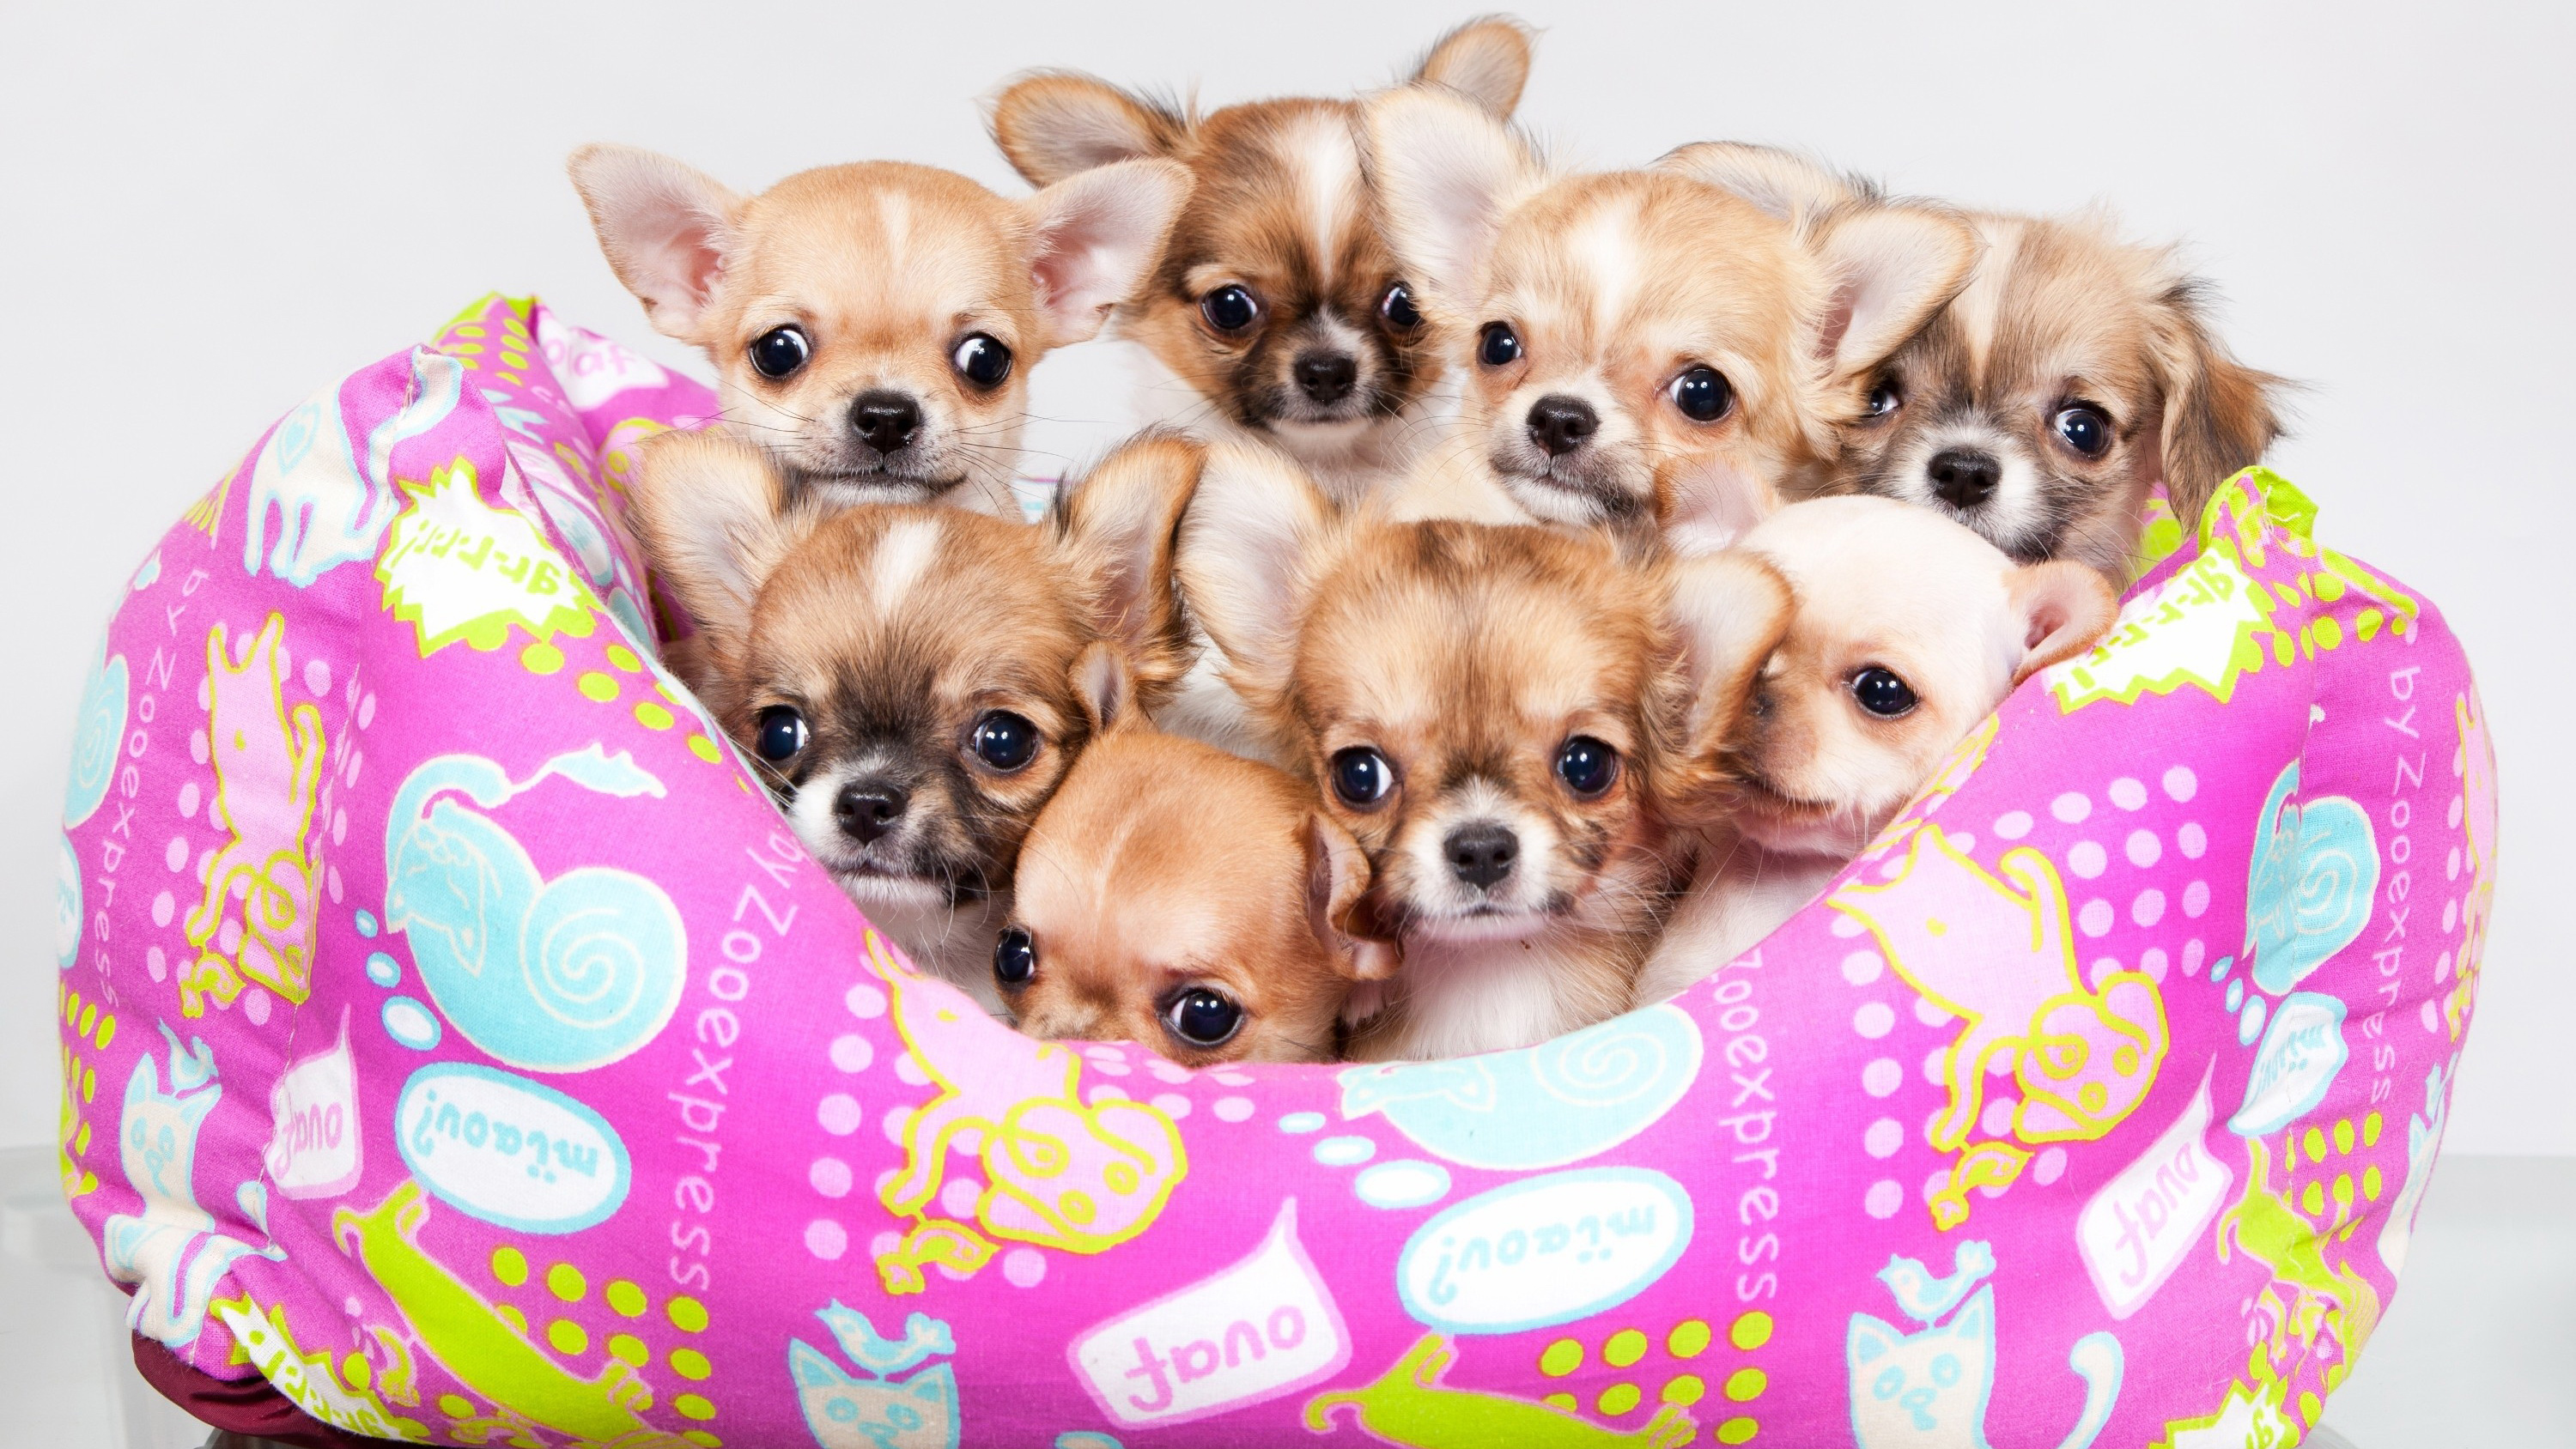 animal, puppy, chihuahua, cute, dog, dogs